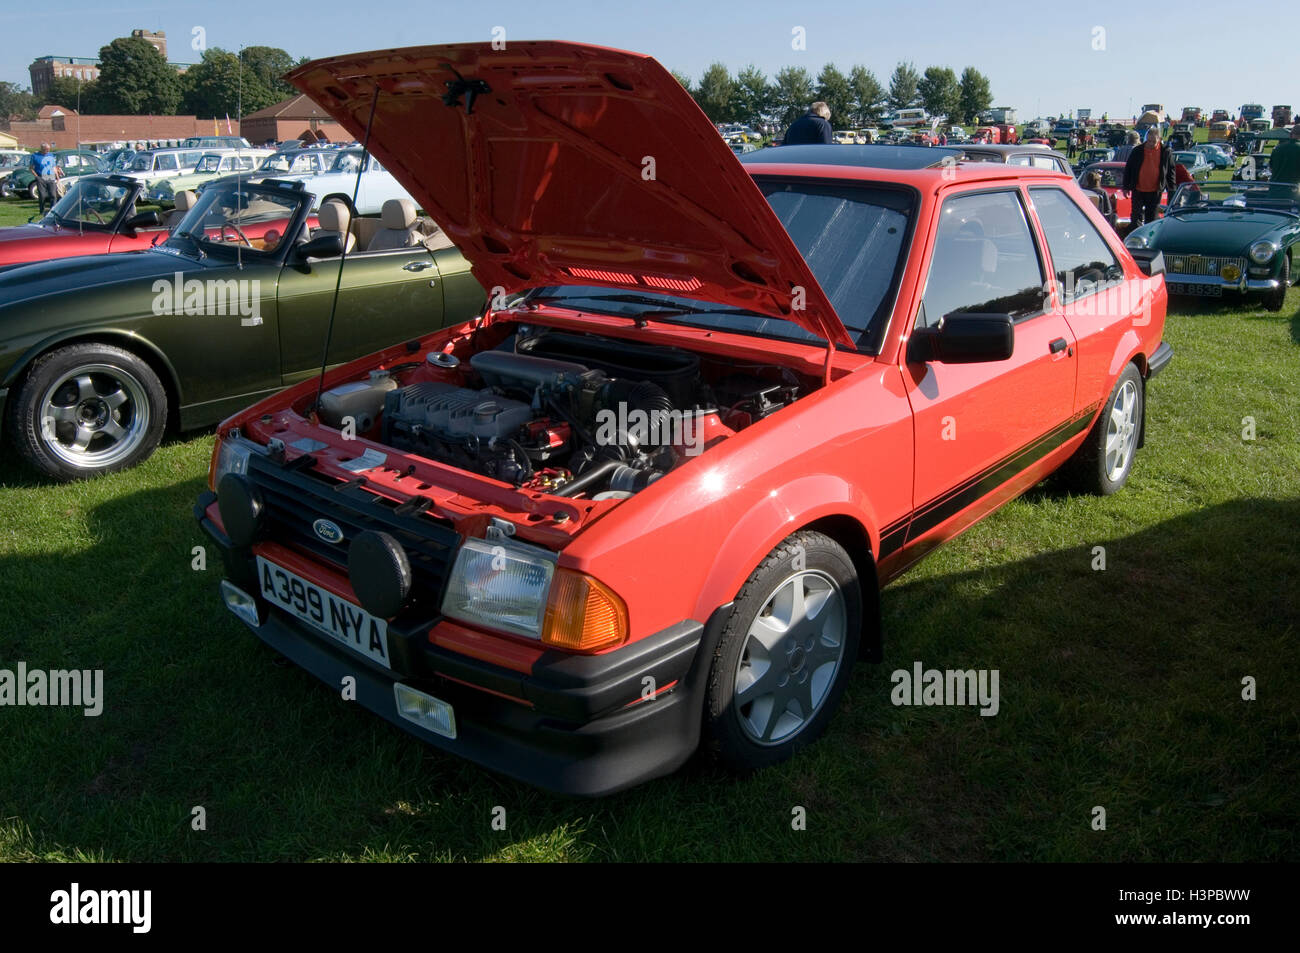 Ford ESCORT XR3 XR3i berline bicorps chaude 80s 1980s Banque D'Images